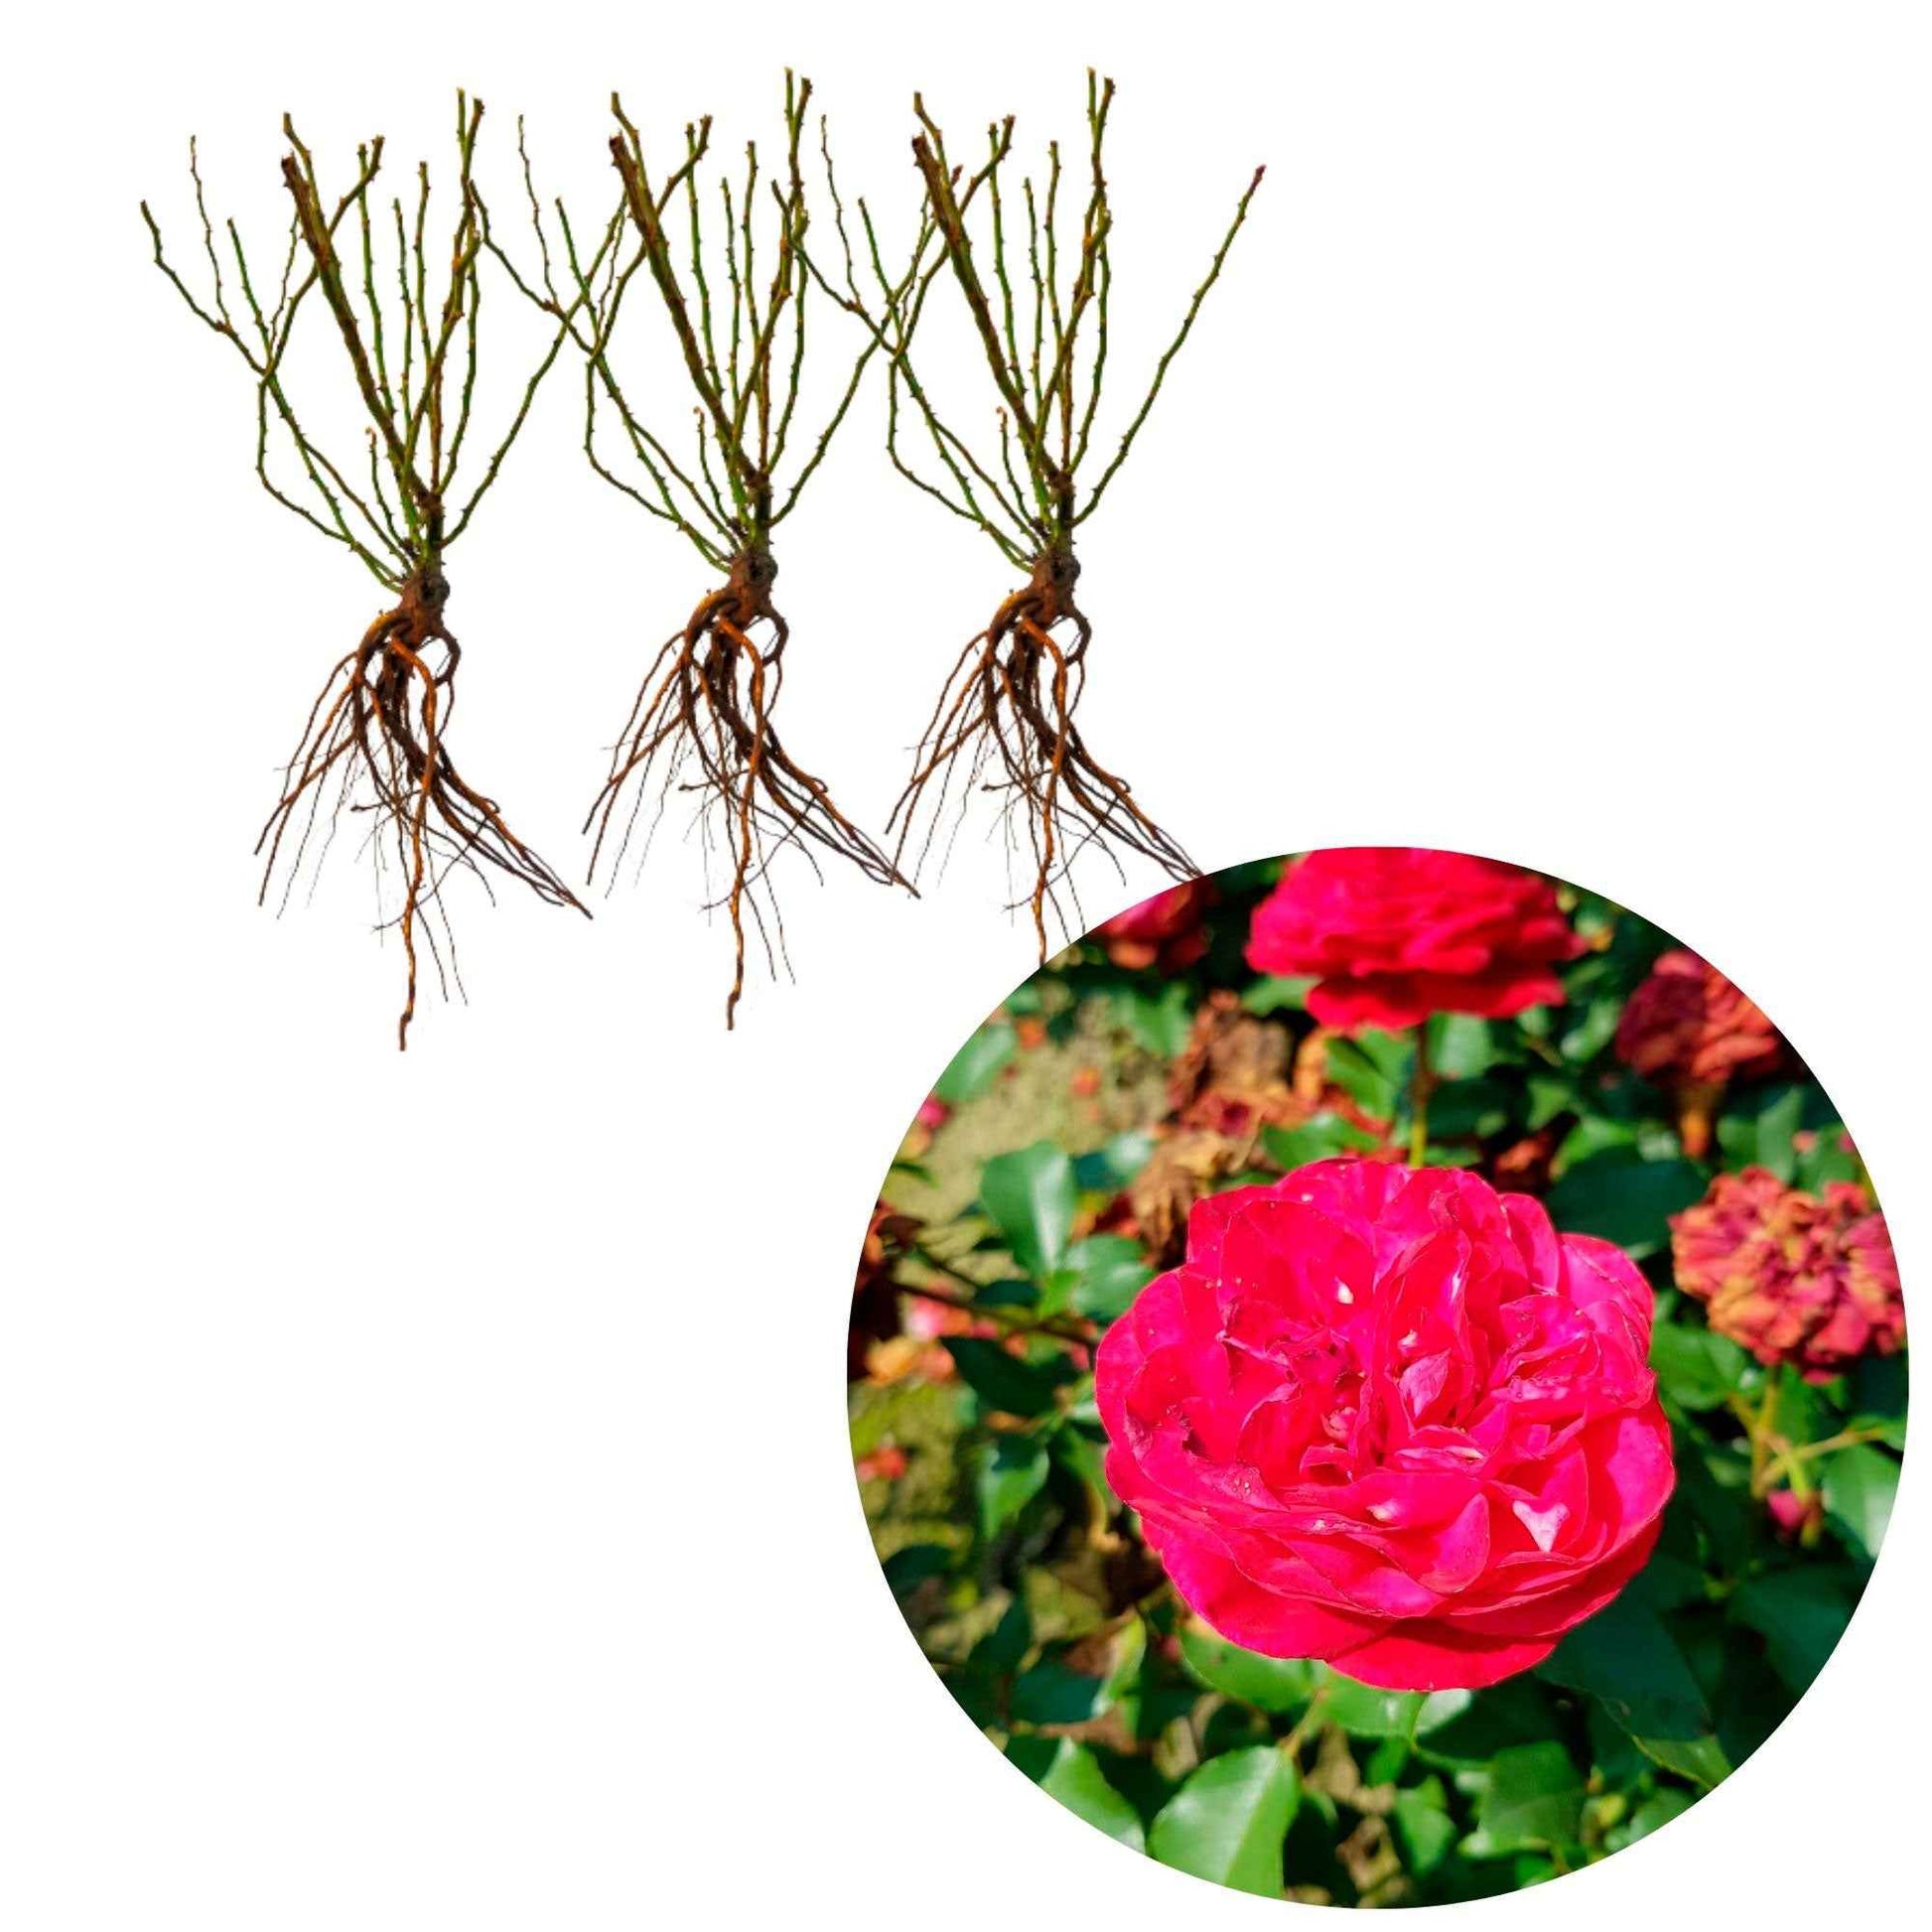 3x Roos Rosa 'Red Meilove'® Rood  - Bare rooted - Winterhard - Rozen